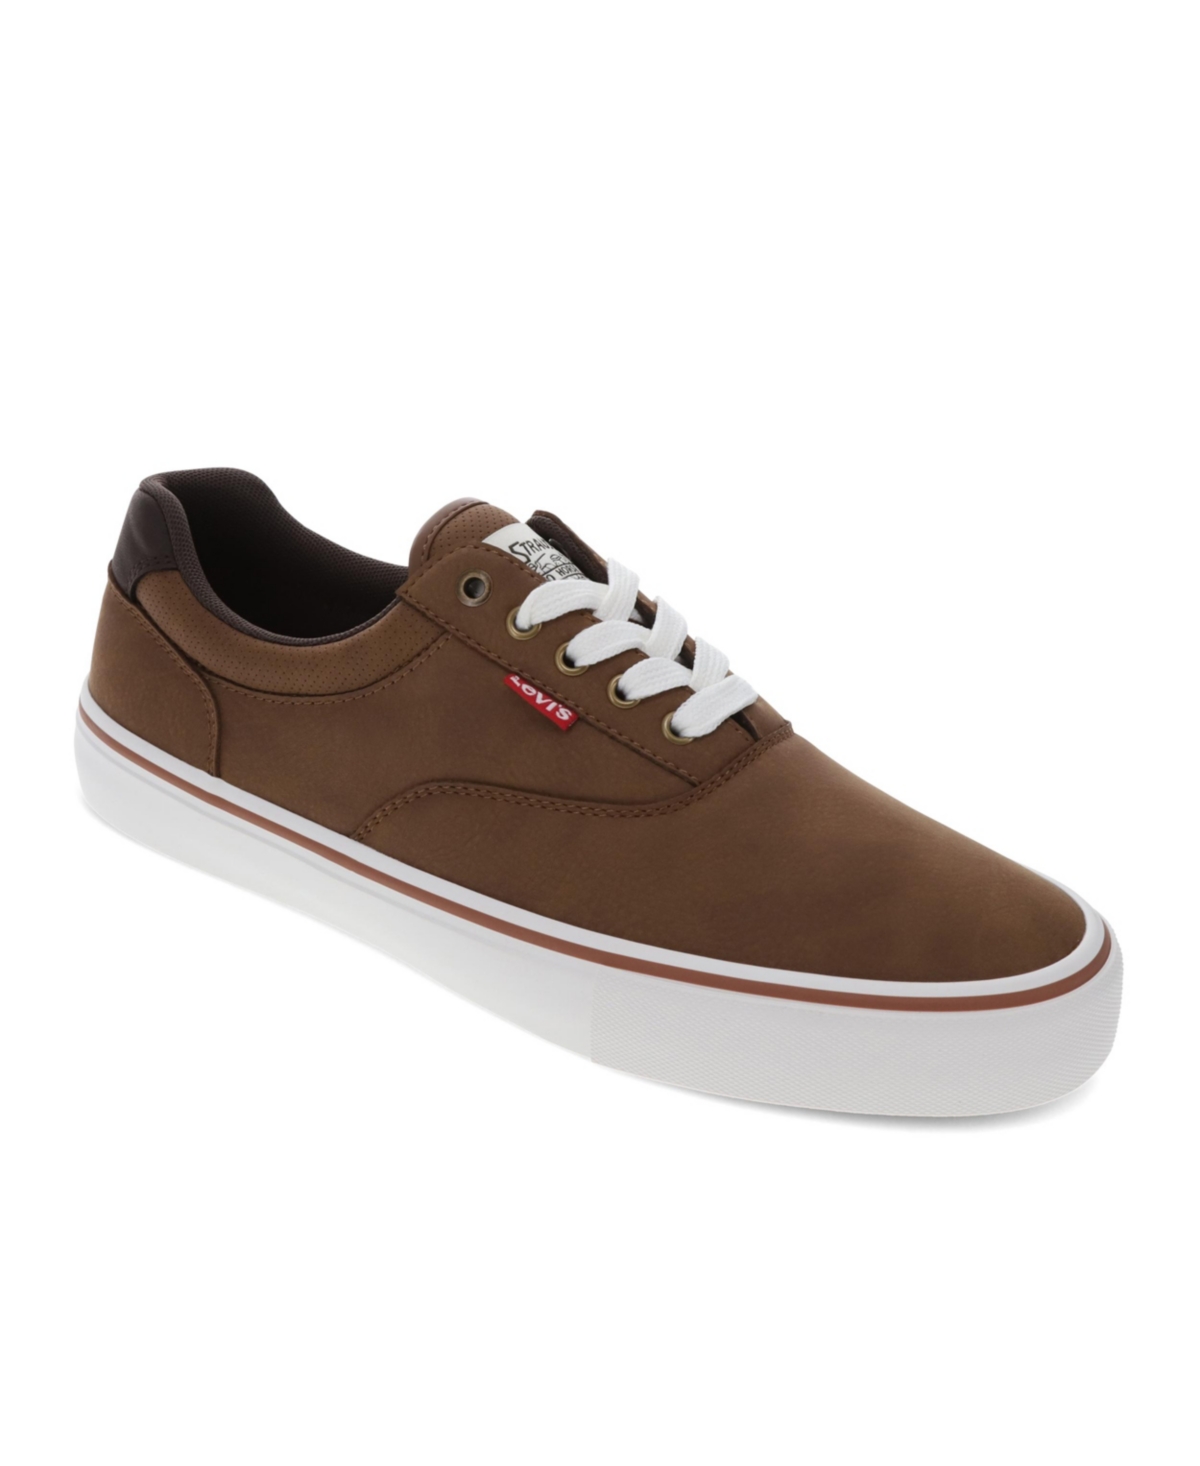 Men's Thane Fashion Athletic Lace Up Sneakers - Chestnut, Dark Brown